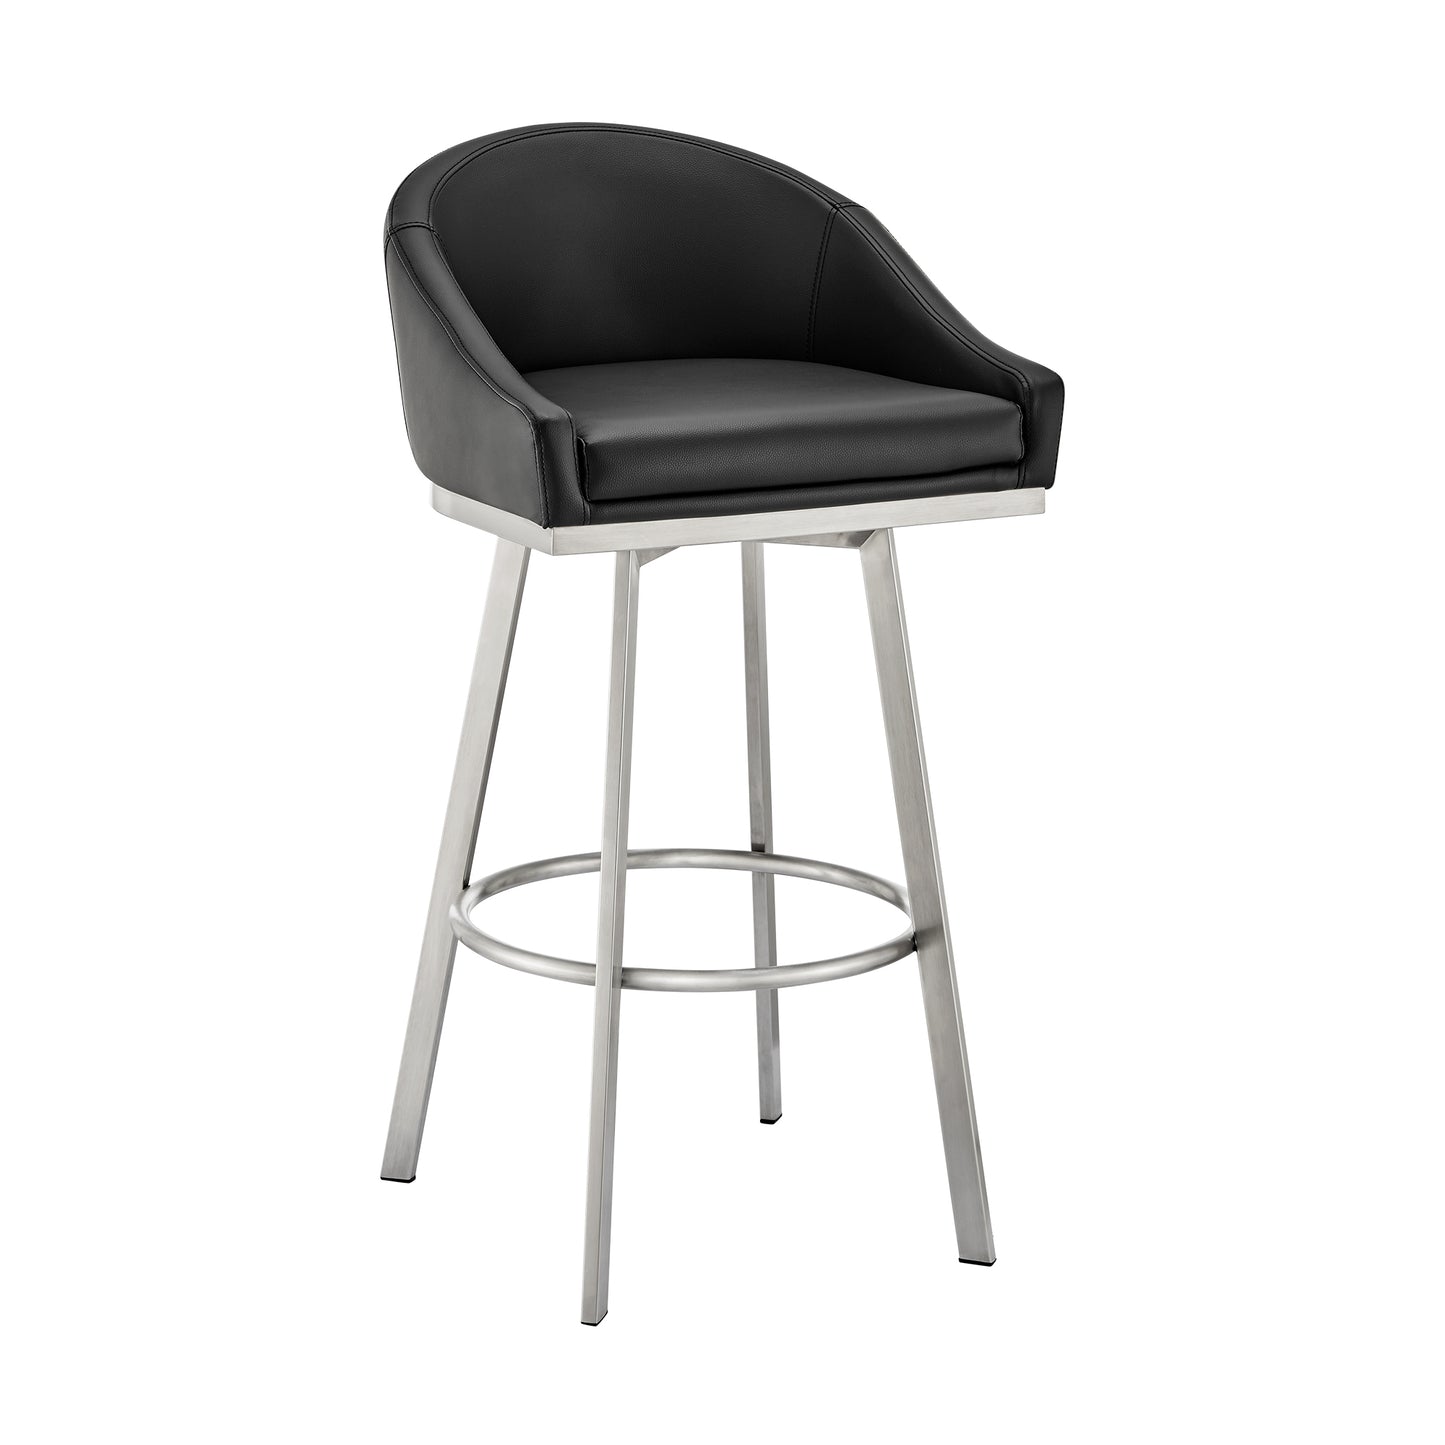 Eleanor 30" Swivel Bar Stool in Brushed Stainless Steel with Black Faux Leather